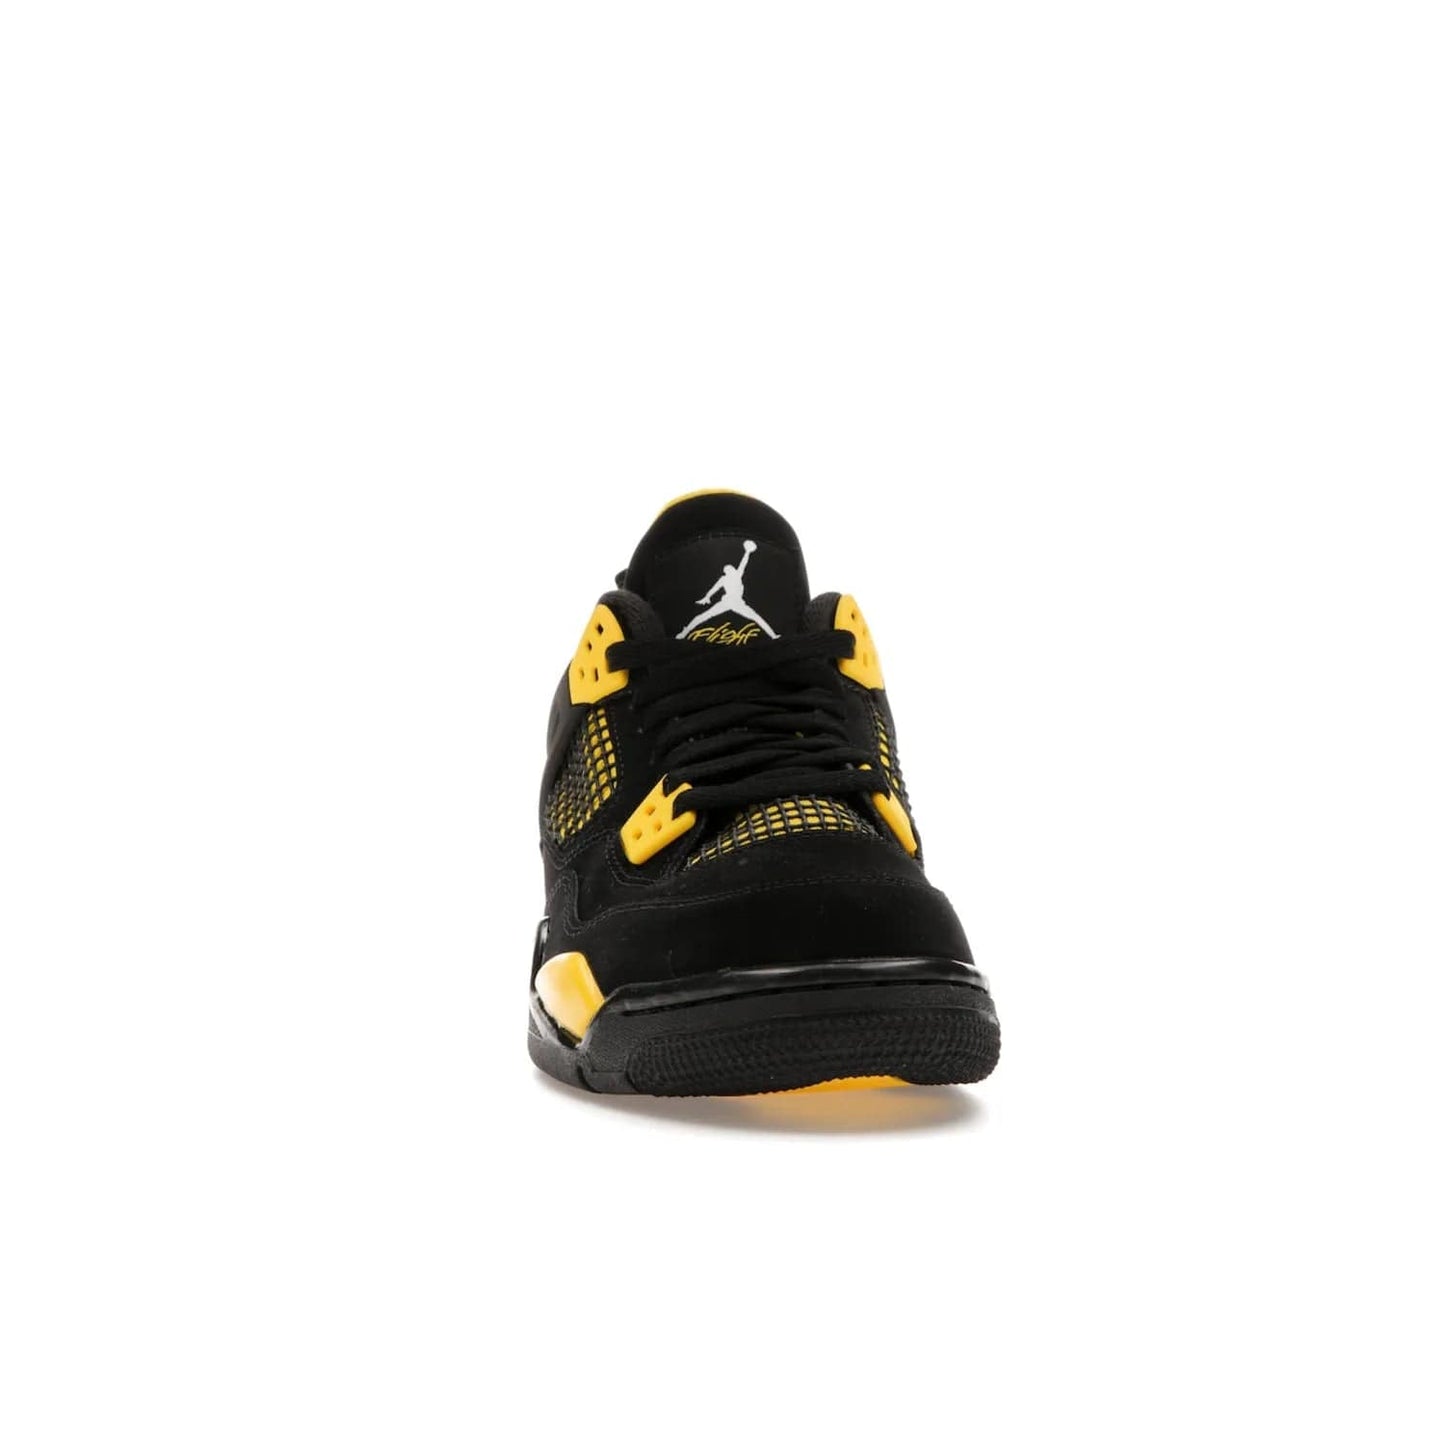 Jordan 4 Retro Thunder (2023) (GS) - Image 9 - Only at www.BallersClubKickz.com - Introducing the iconic Jordan 4 Retro Thunder from the 2023 collection! Sleek black and Tour Yellow detailing. Signature Jordan tongue tab. Mesmerizing design for sneaker collectors. Get yours now!